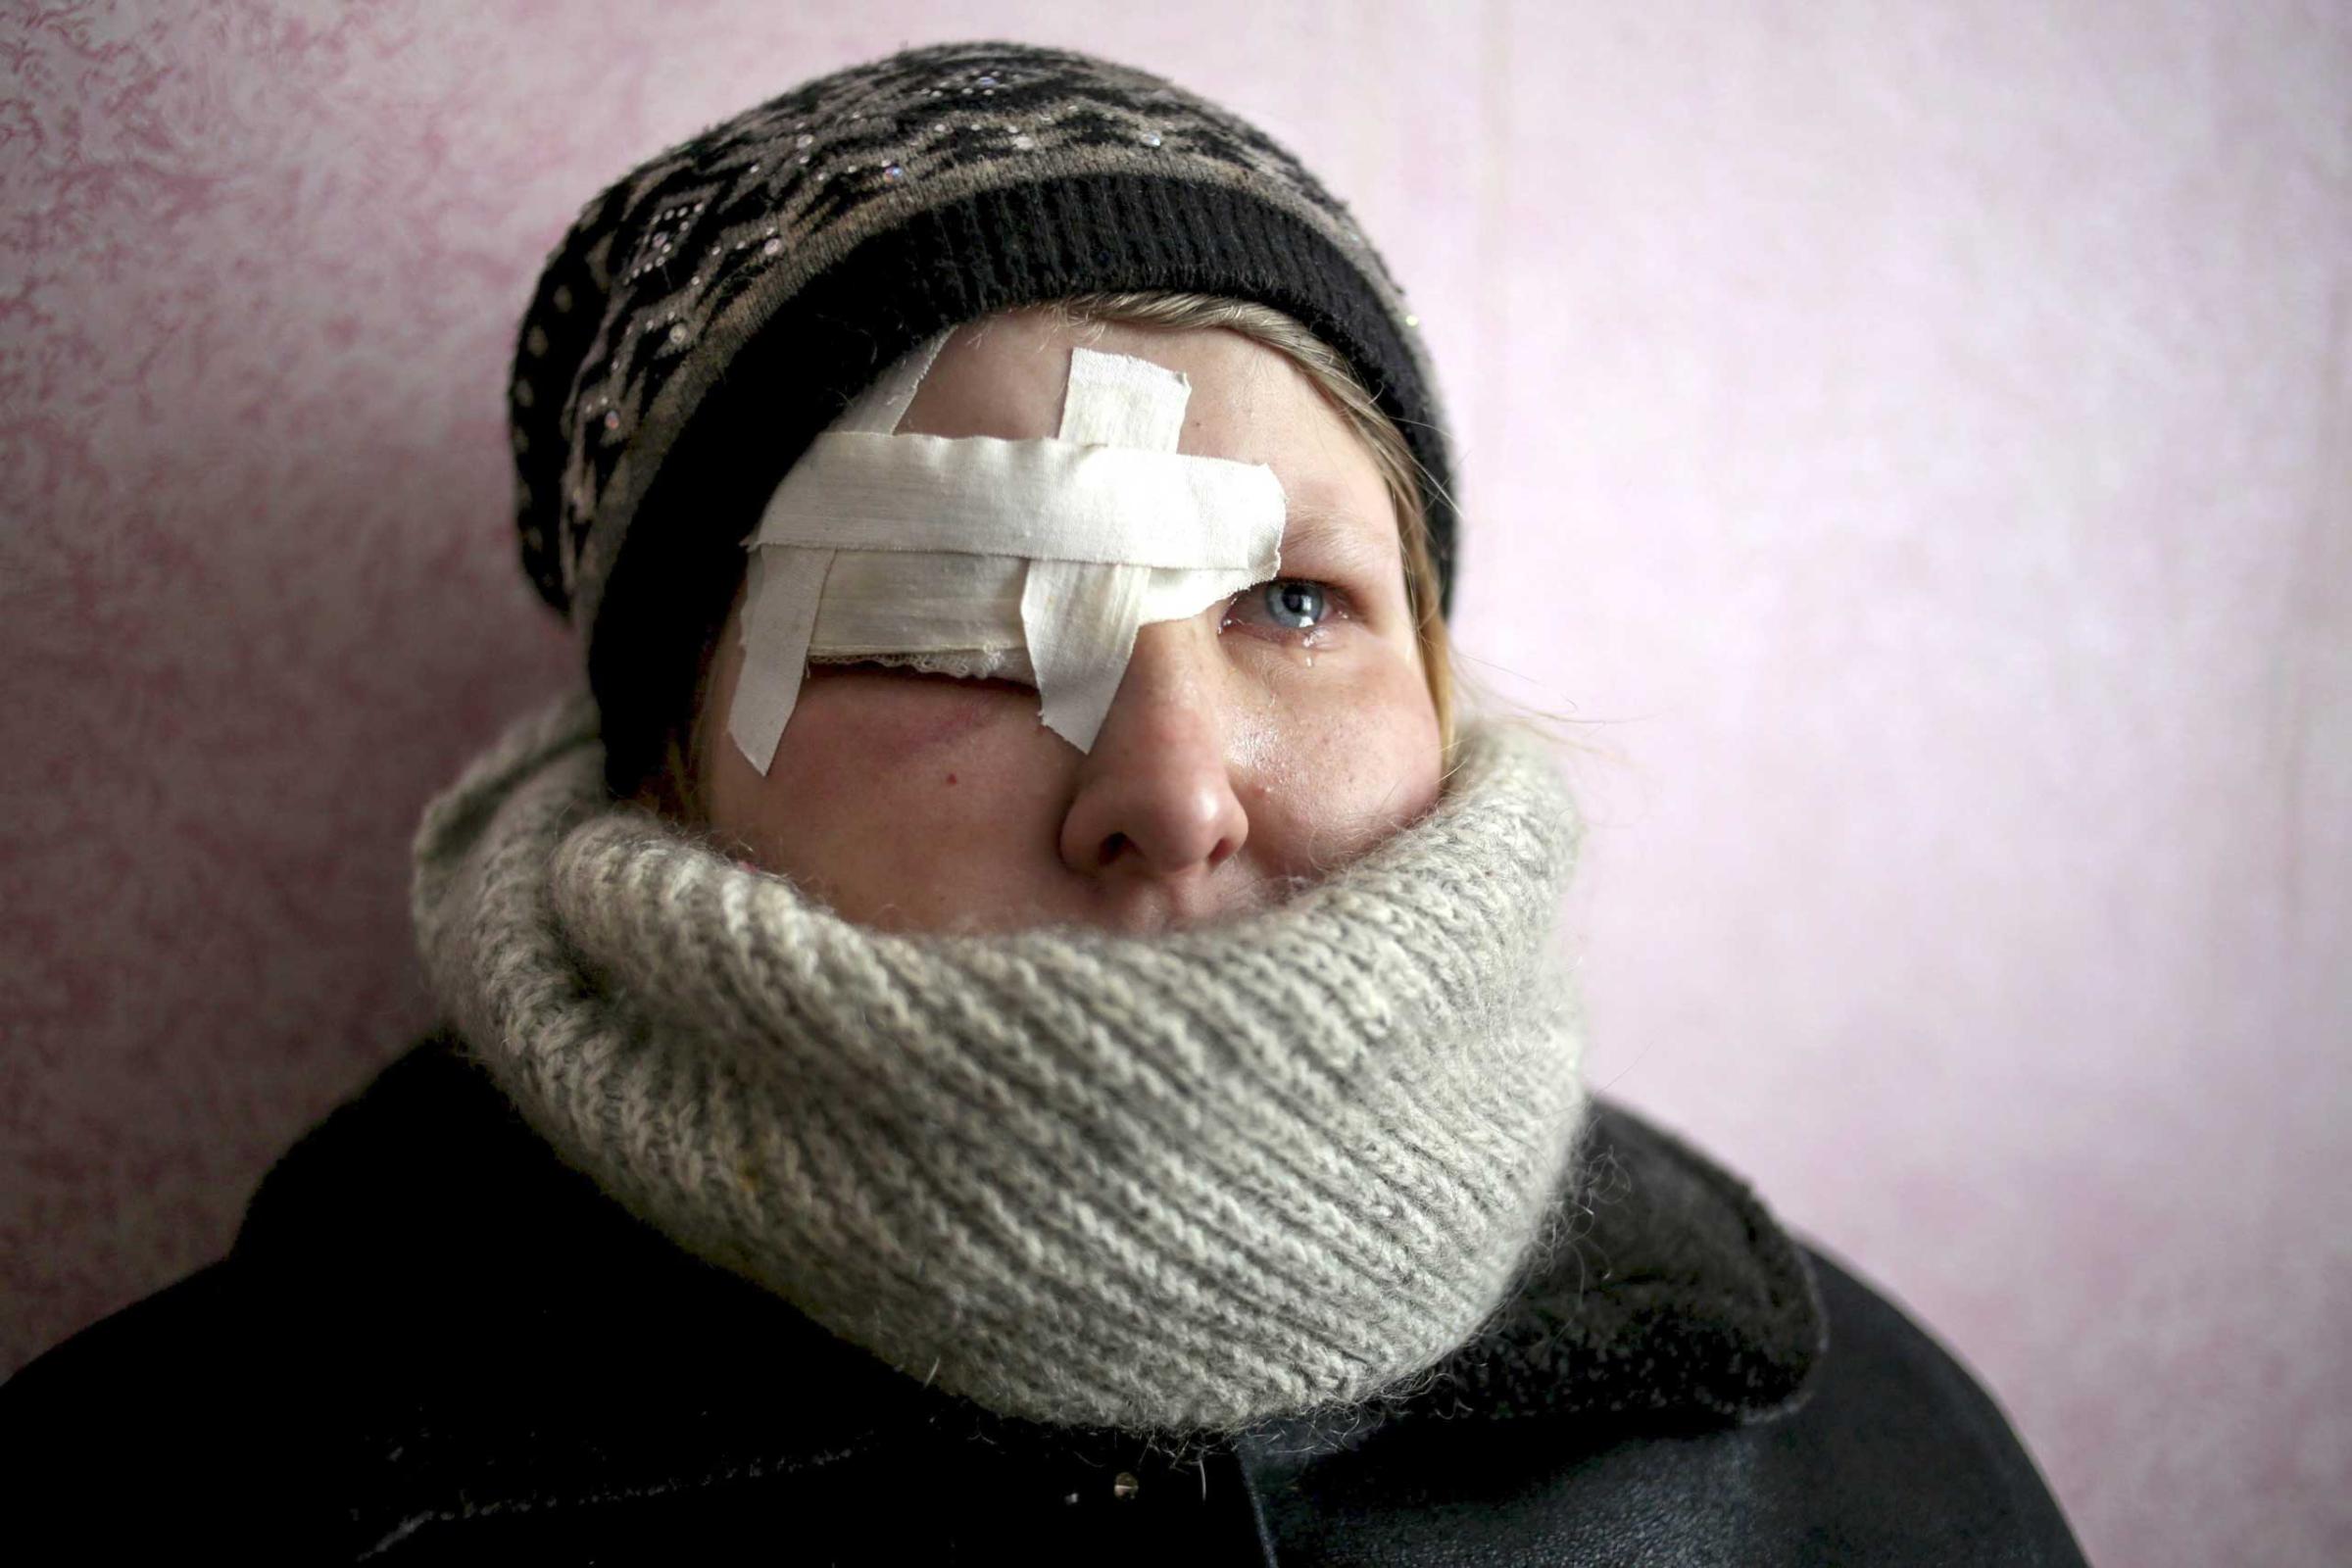 Yulia Novomlynets, 18, waits in a line to receive the humanitarian aid in the local House of Culture, which is used as a bomb shelter in Mironovka village, near Debaltseve of Donetsk area, Feb. 17, 2015.